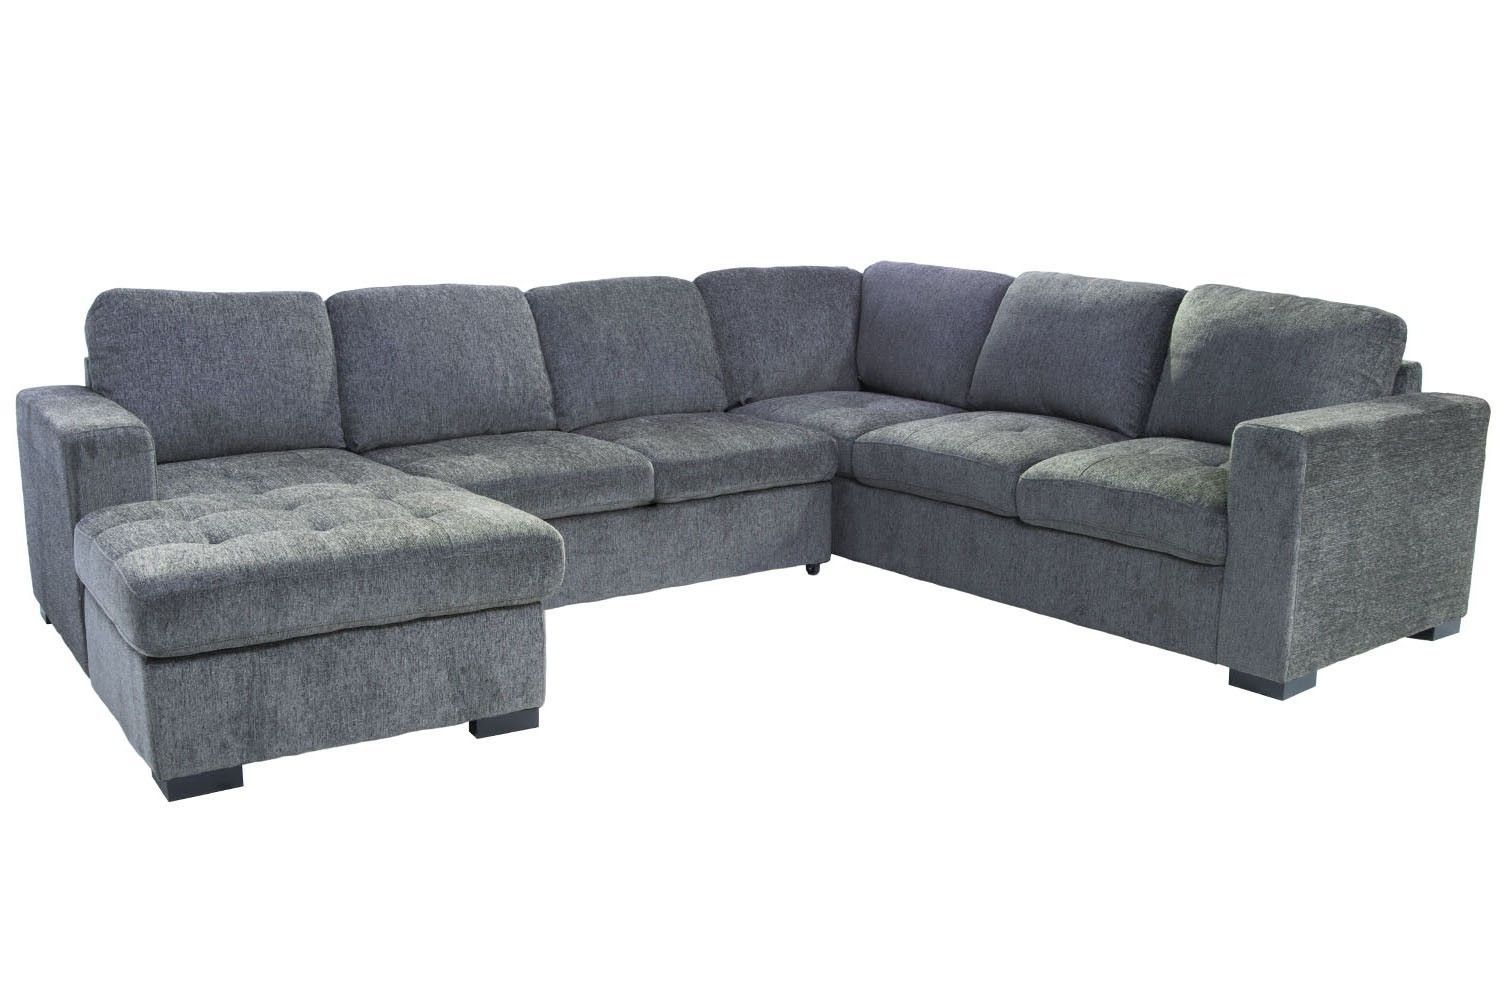 Lane Vivian 738 Sectional | Furniture | Pinterest | Family Room Intended For Quincy Il Sectional Sofas (View 4 of 10)